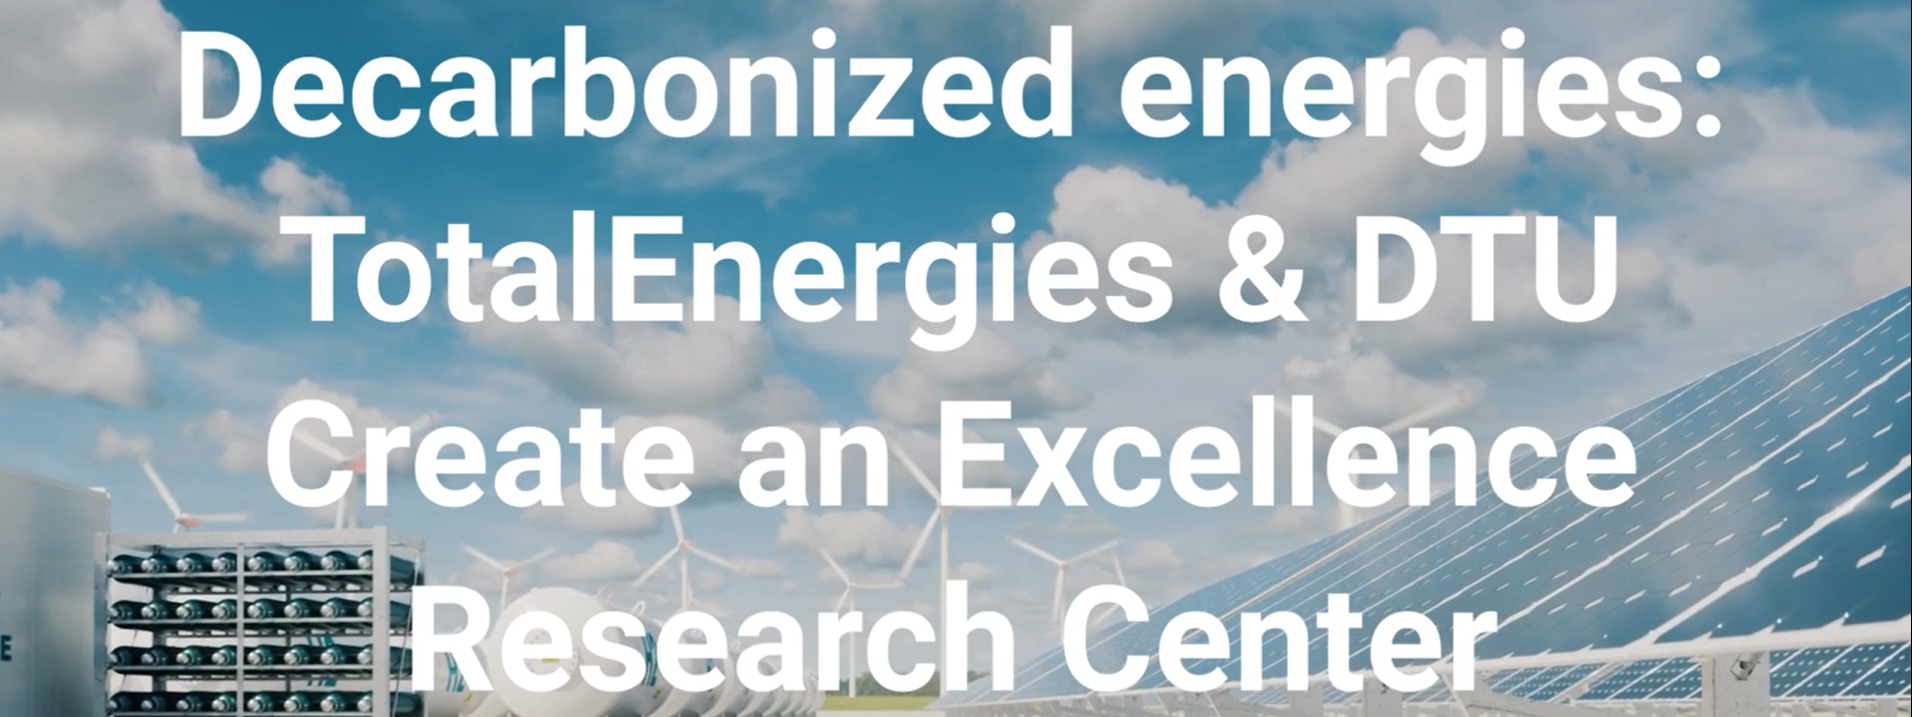 Decarbonized energies: TotalEnergies & DTU create an excellence research center